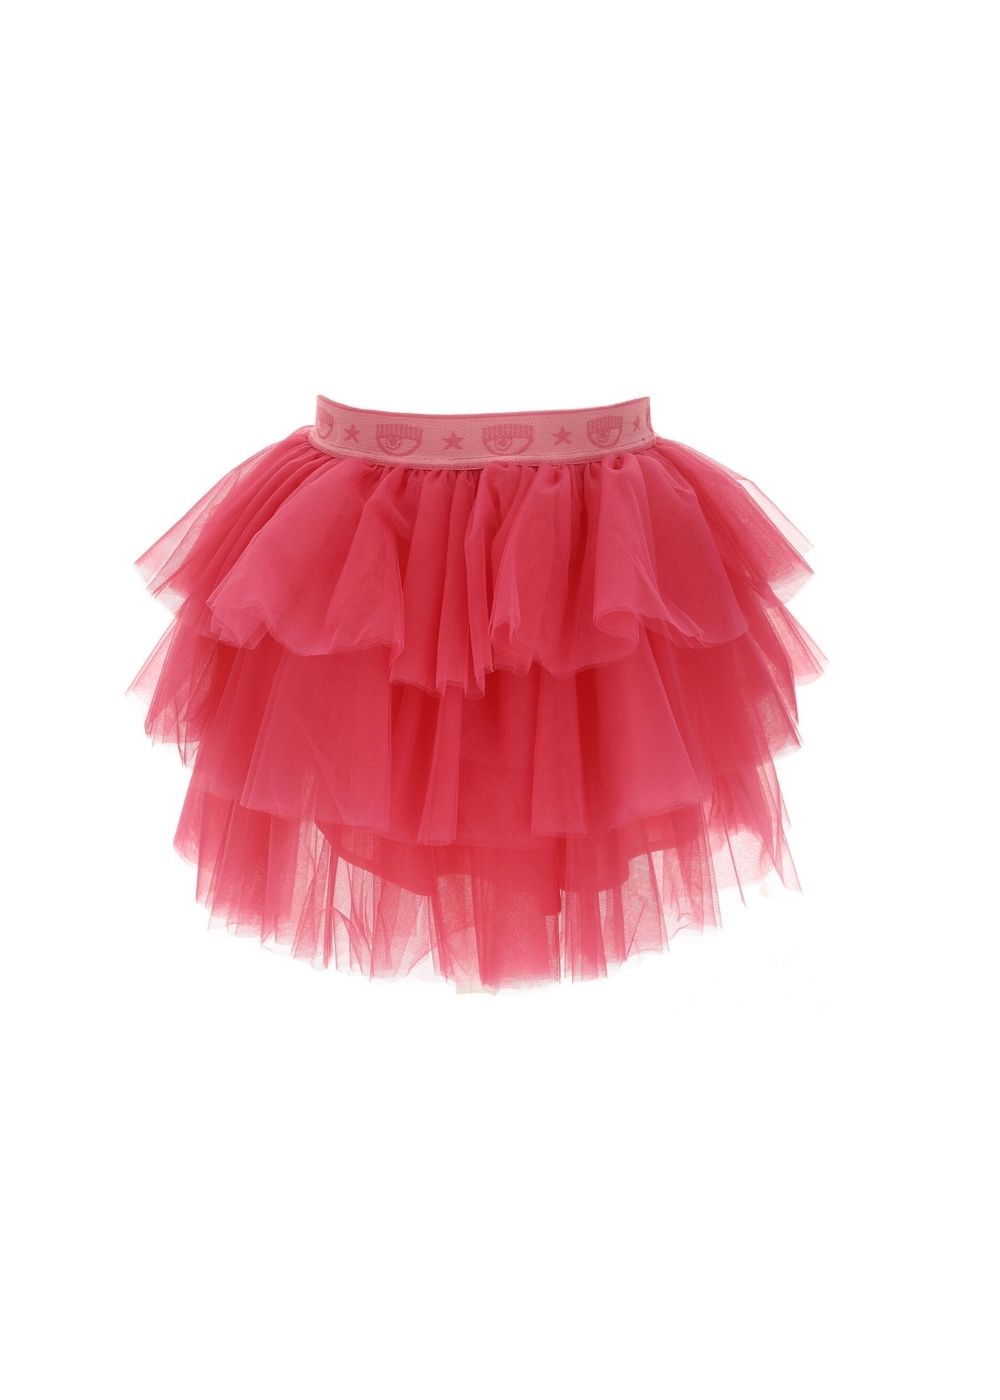 Featured image for “Chiara Ferragni Gonna Tulle”